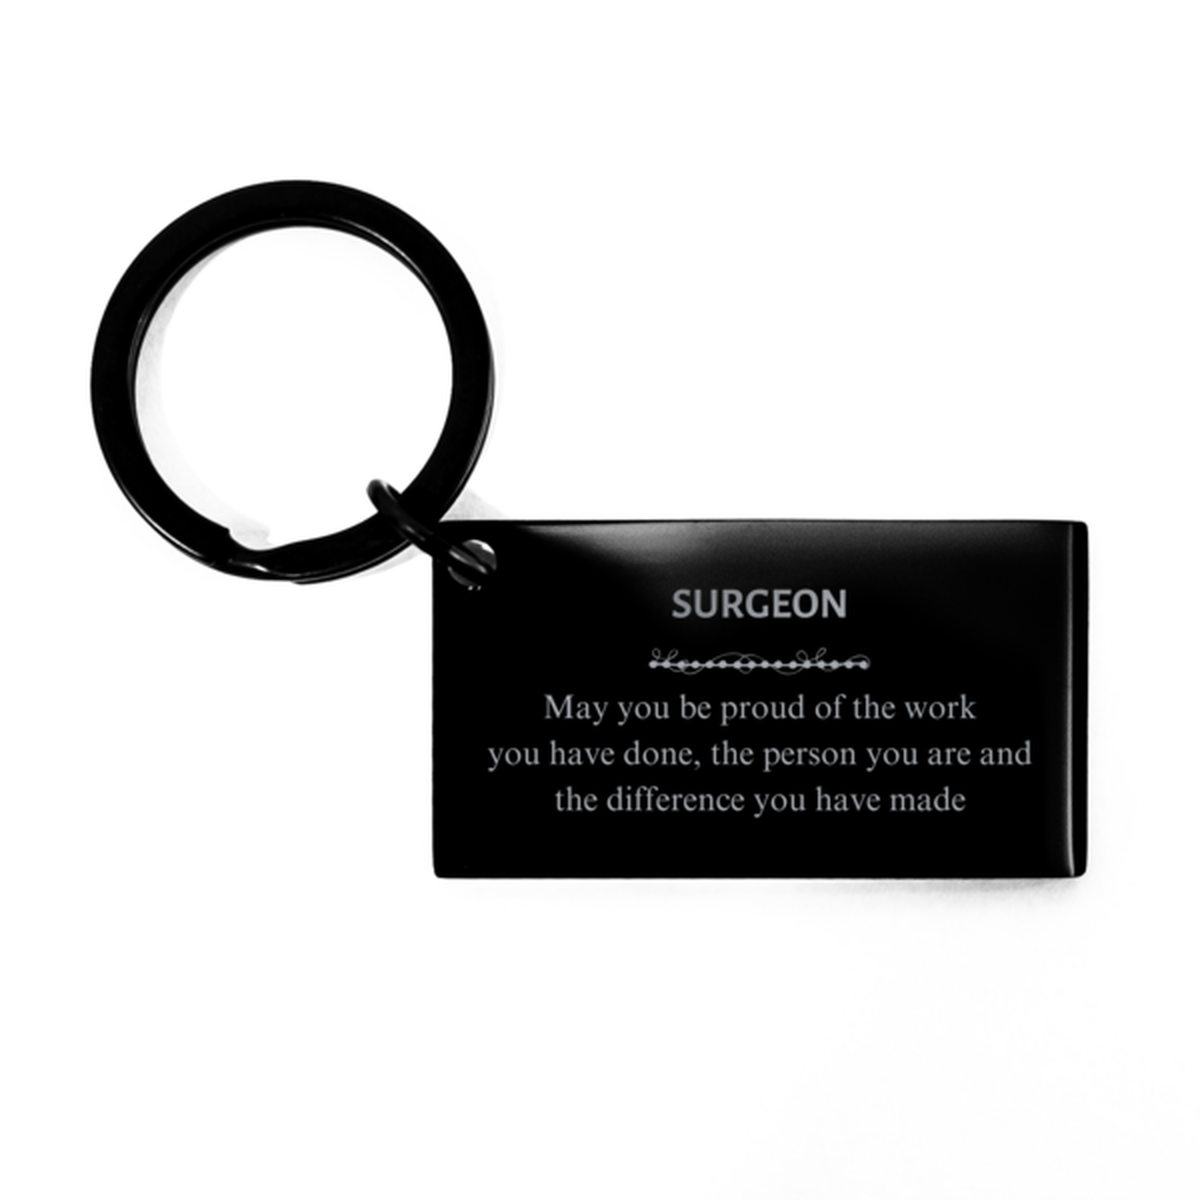 Web Developer May you be proud of the work you have done, Retirement Surgeon Keychain for Colleague Appreciation Gifts Amazing for Surgeon